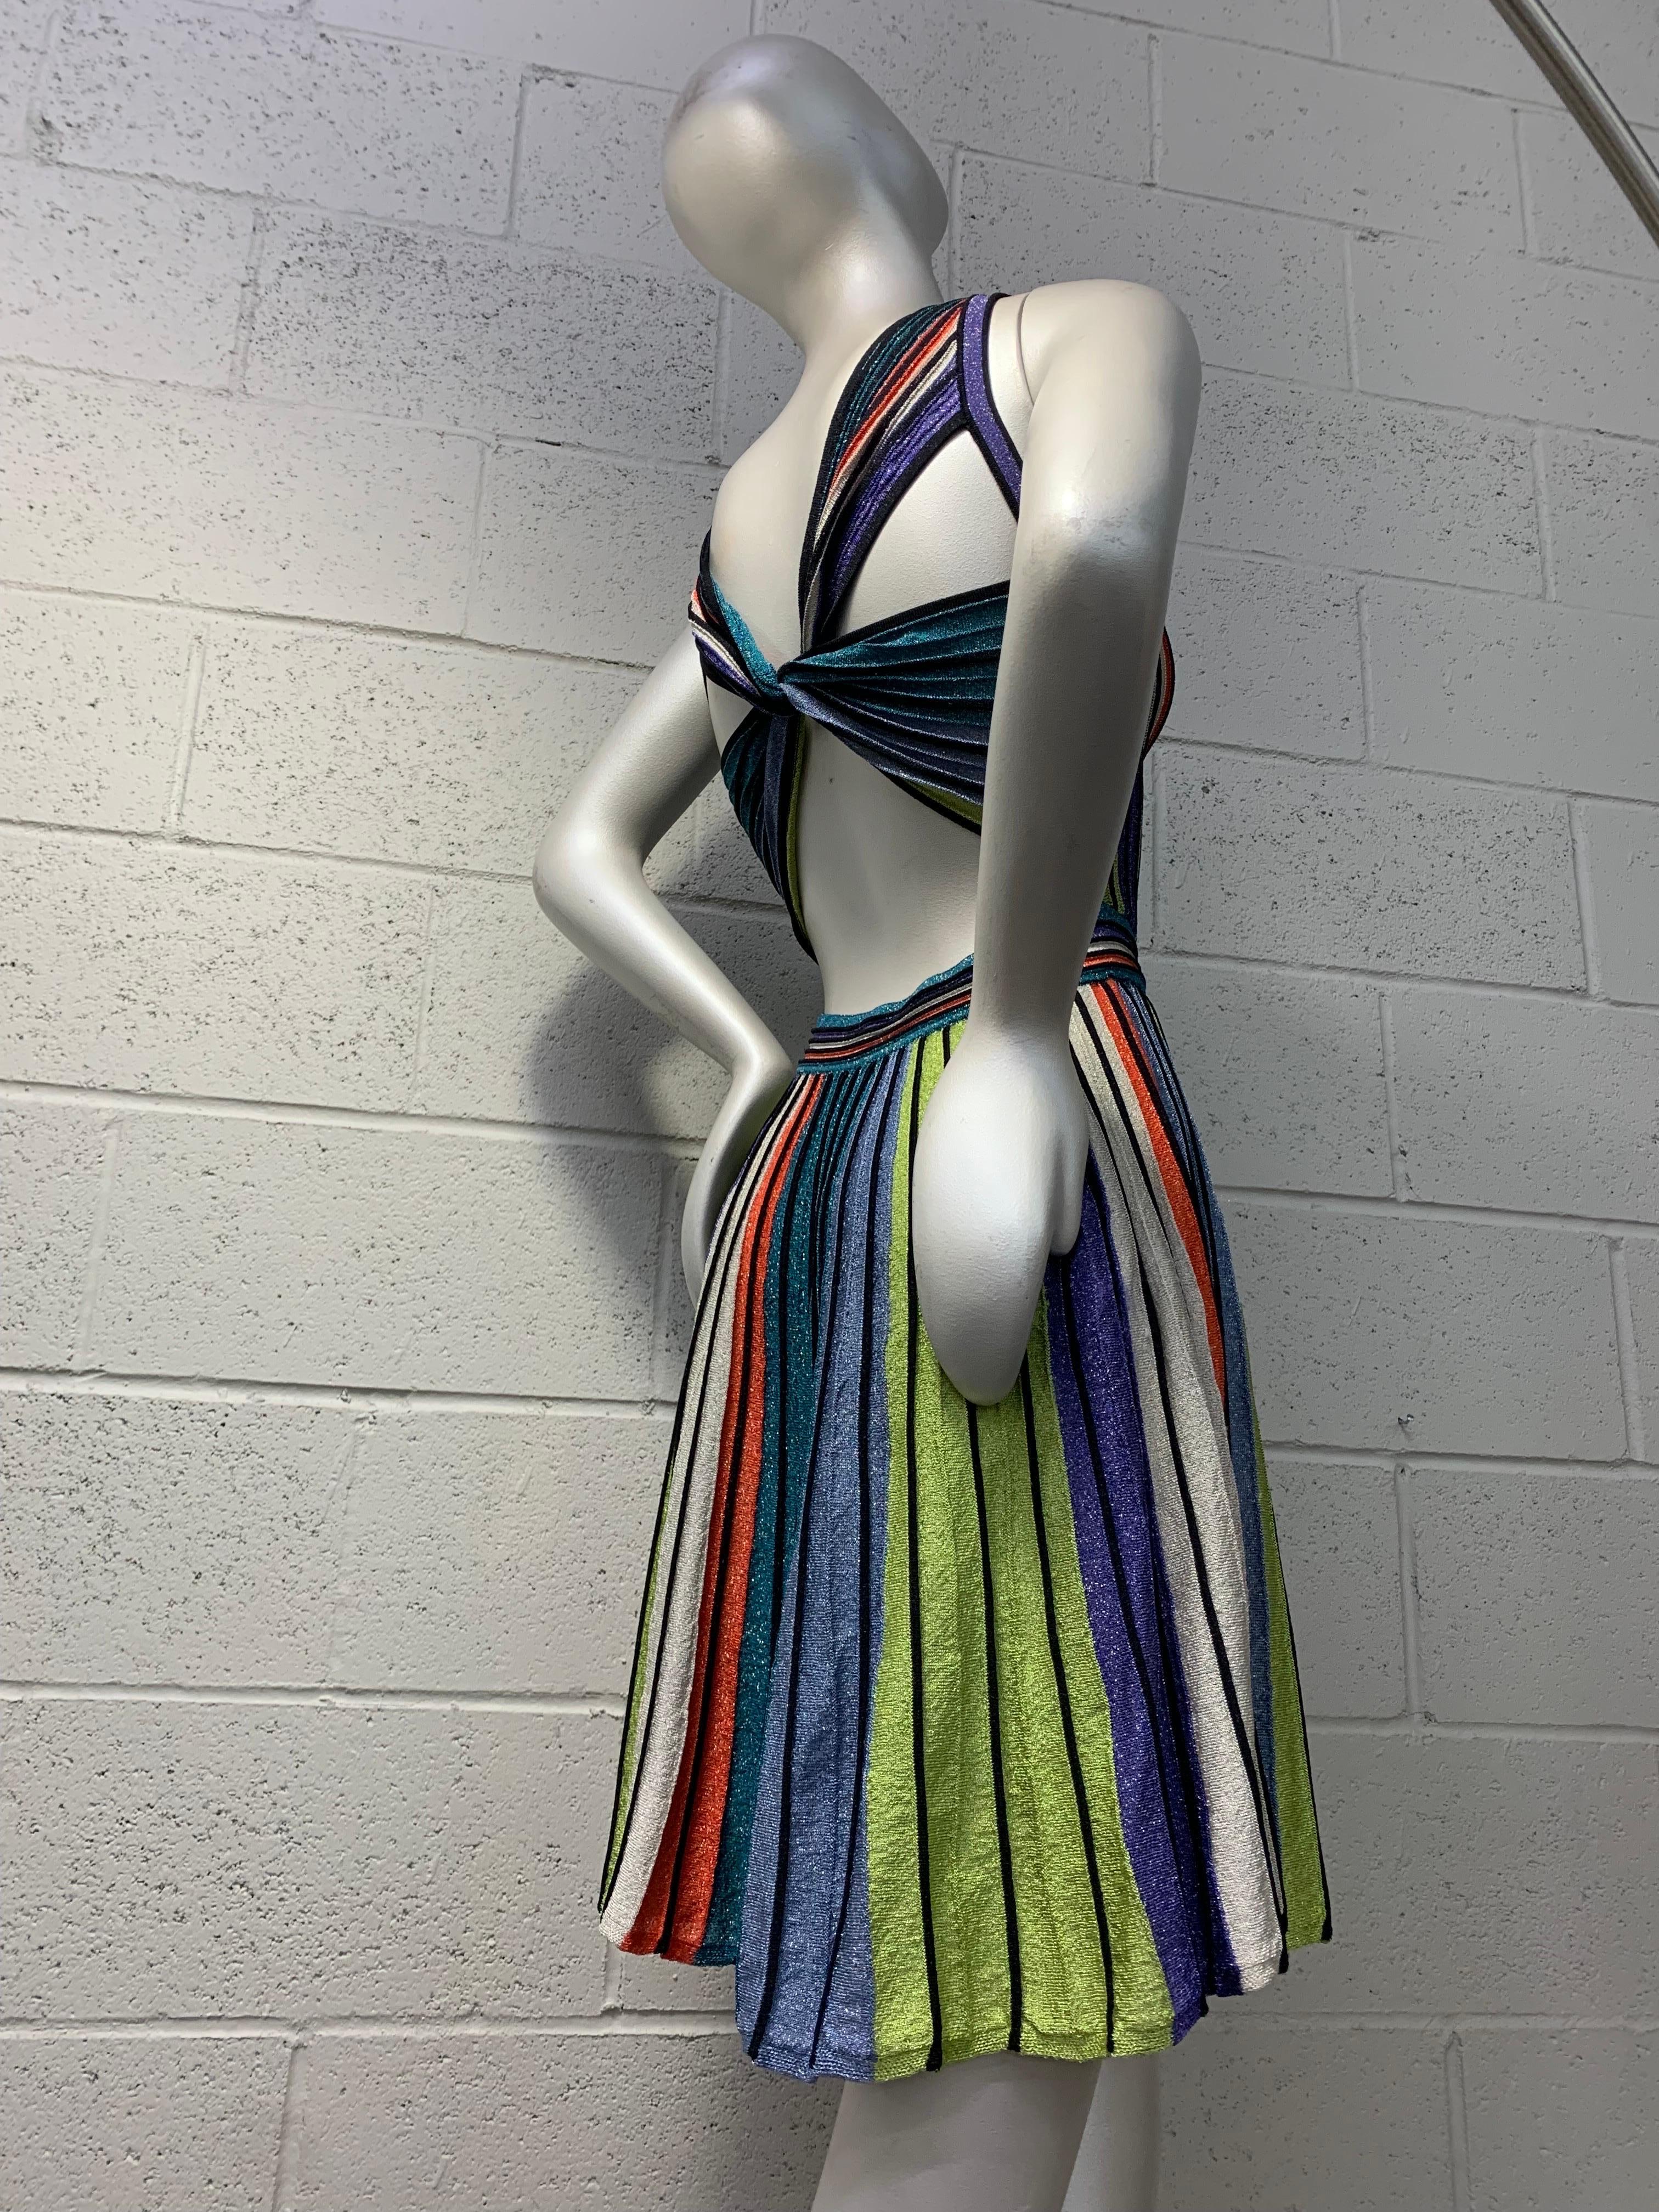 Missoni Multi Color Lurex Rib Knit Flared Dress w Butterfly Crossed Back:  Lurex knit with stretch in rainbow colors. Pull over, no closures. Excellent condition. Marked a European size 42. 